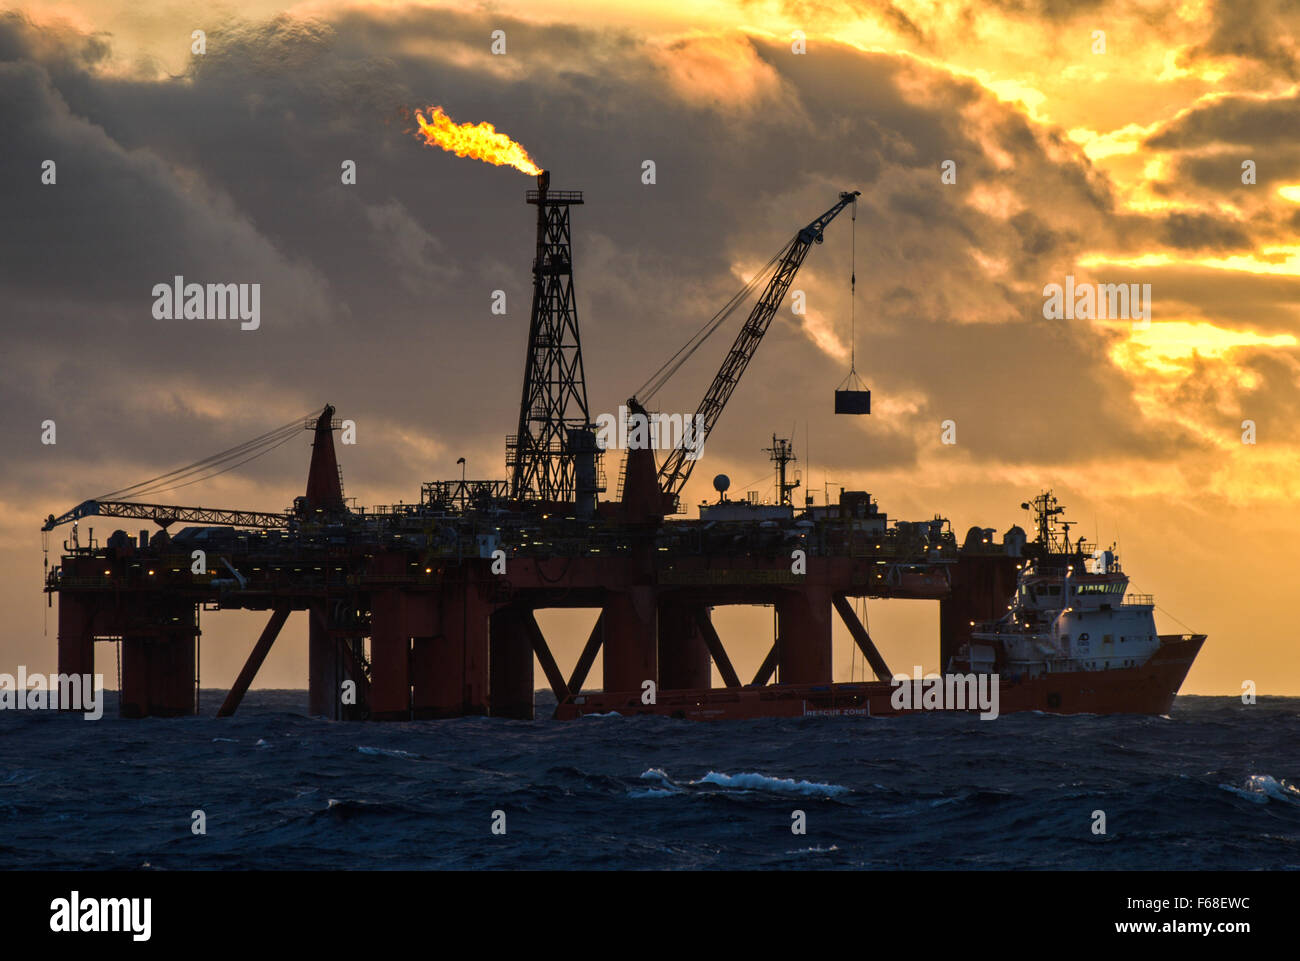 Oil rig and supply vessel in the North Sea Stock Photo